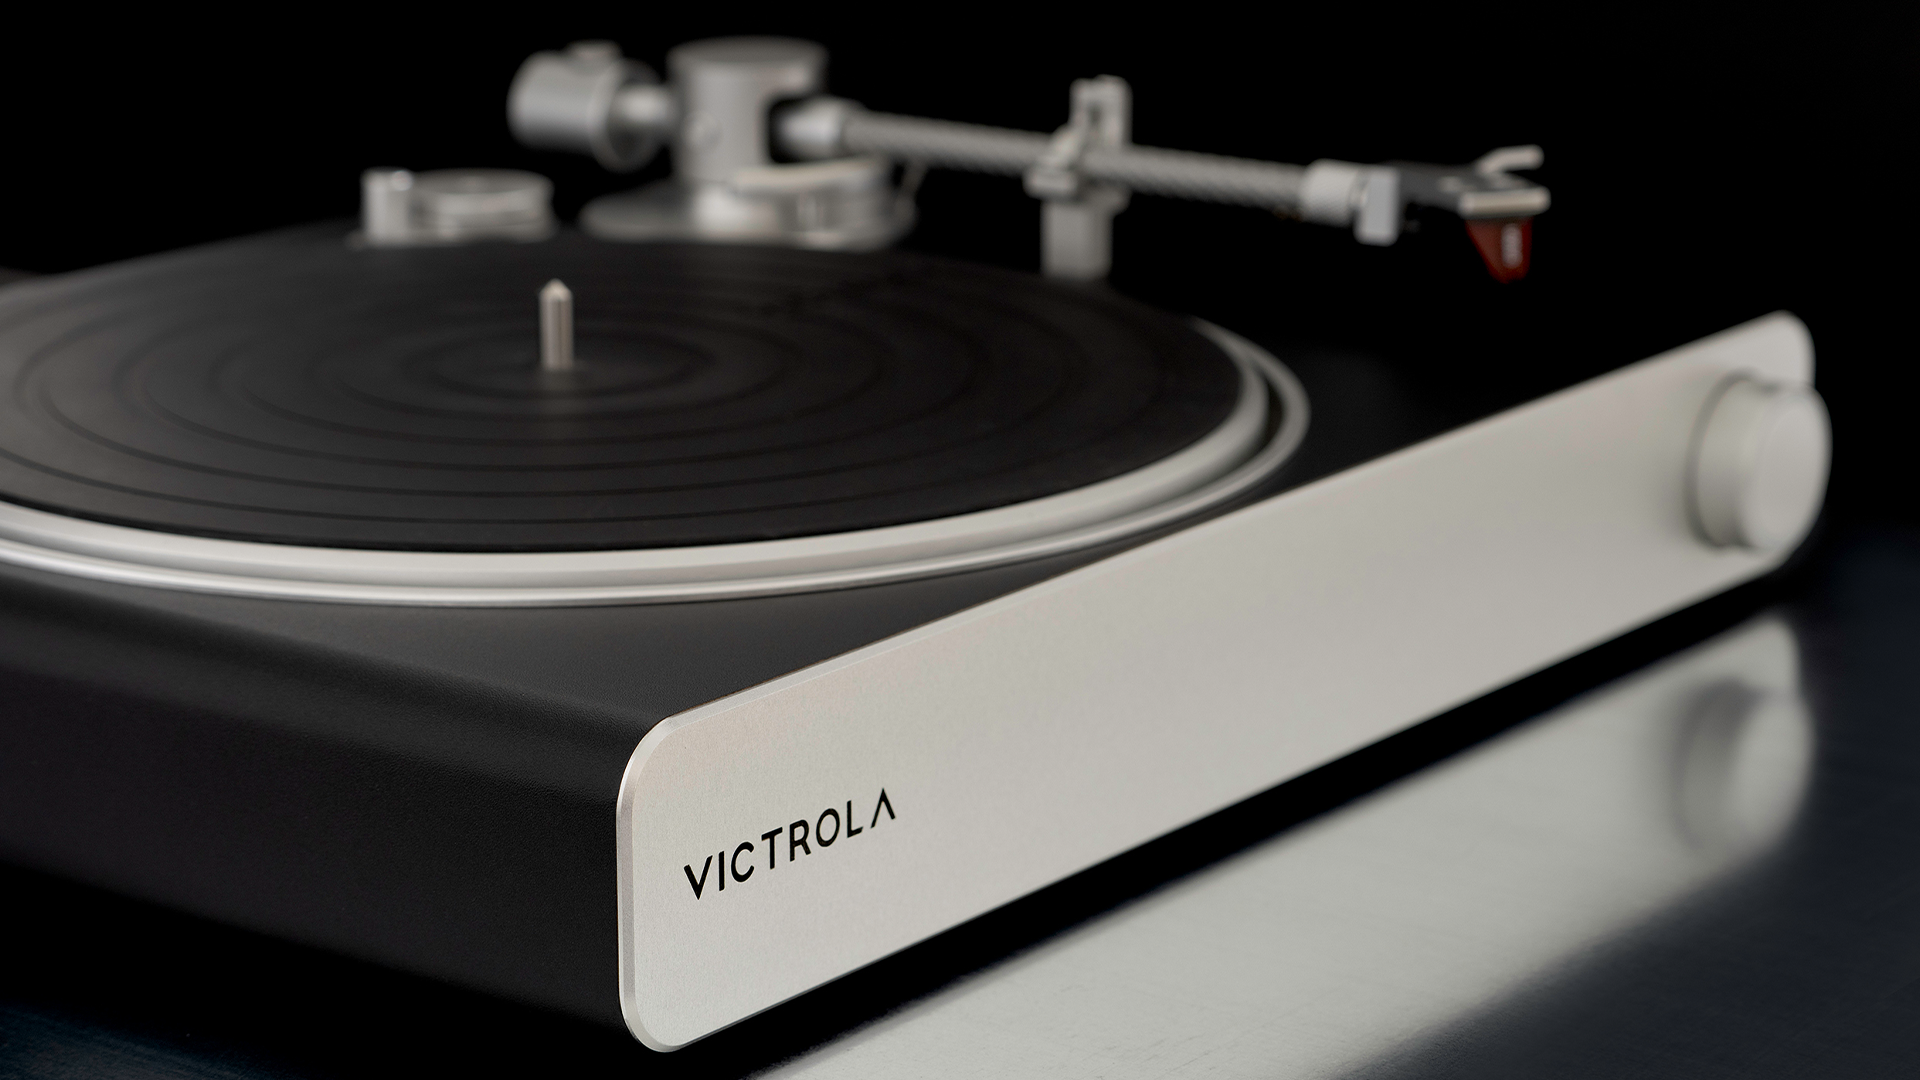 Victrola Launches a Turntable for Sonos Whole-Home Audio